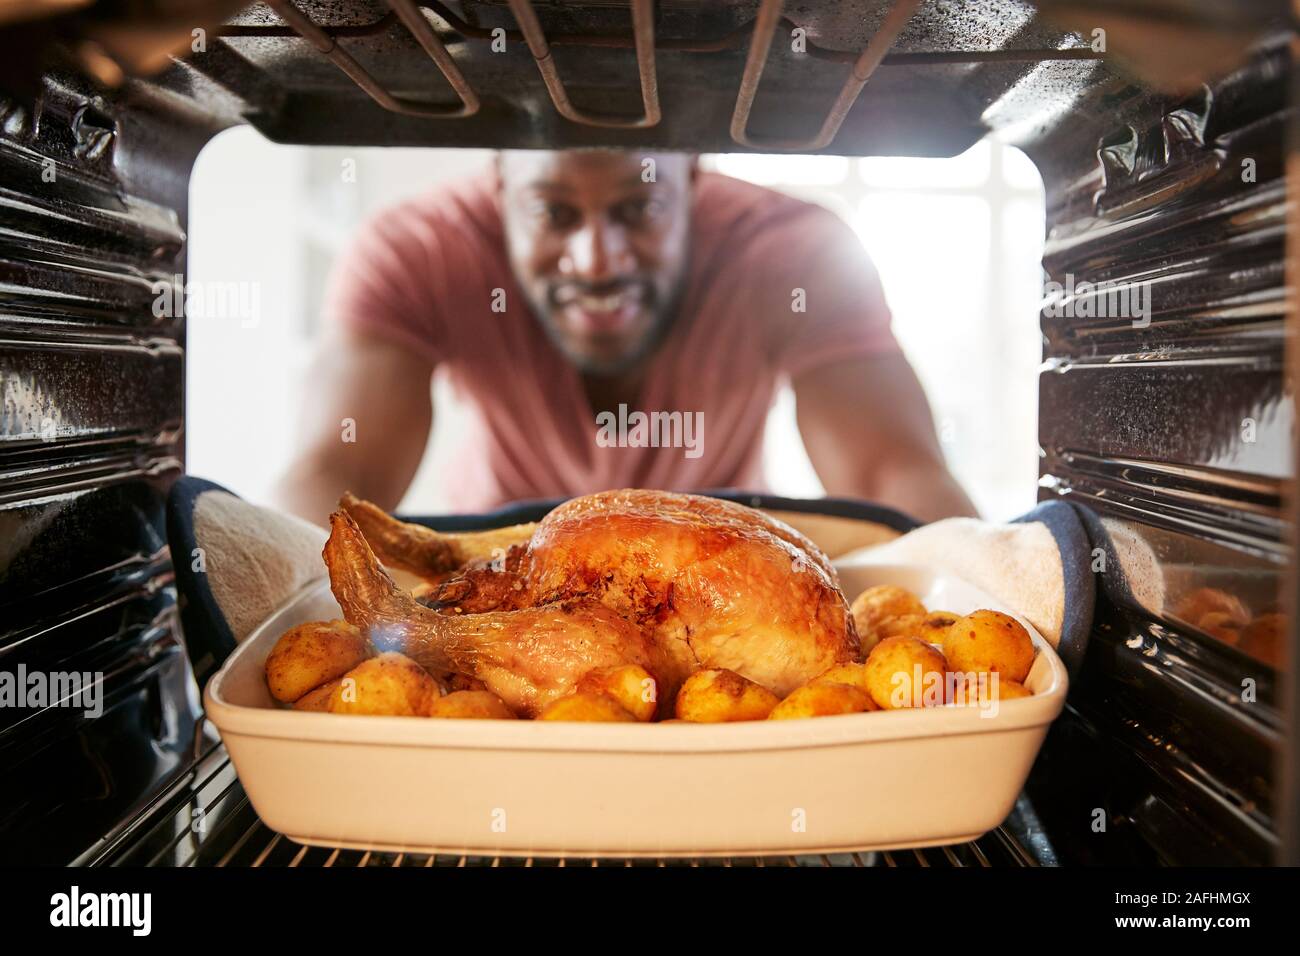 View Looking Out From Inside Oven As Man Cooks Sunday Roast Chicken Dinner Stock Photo